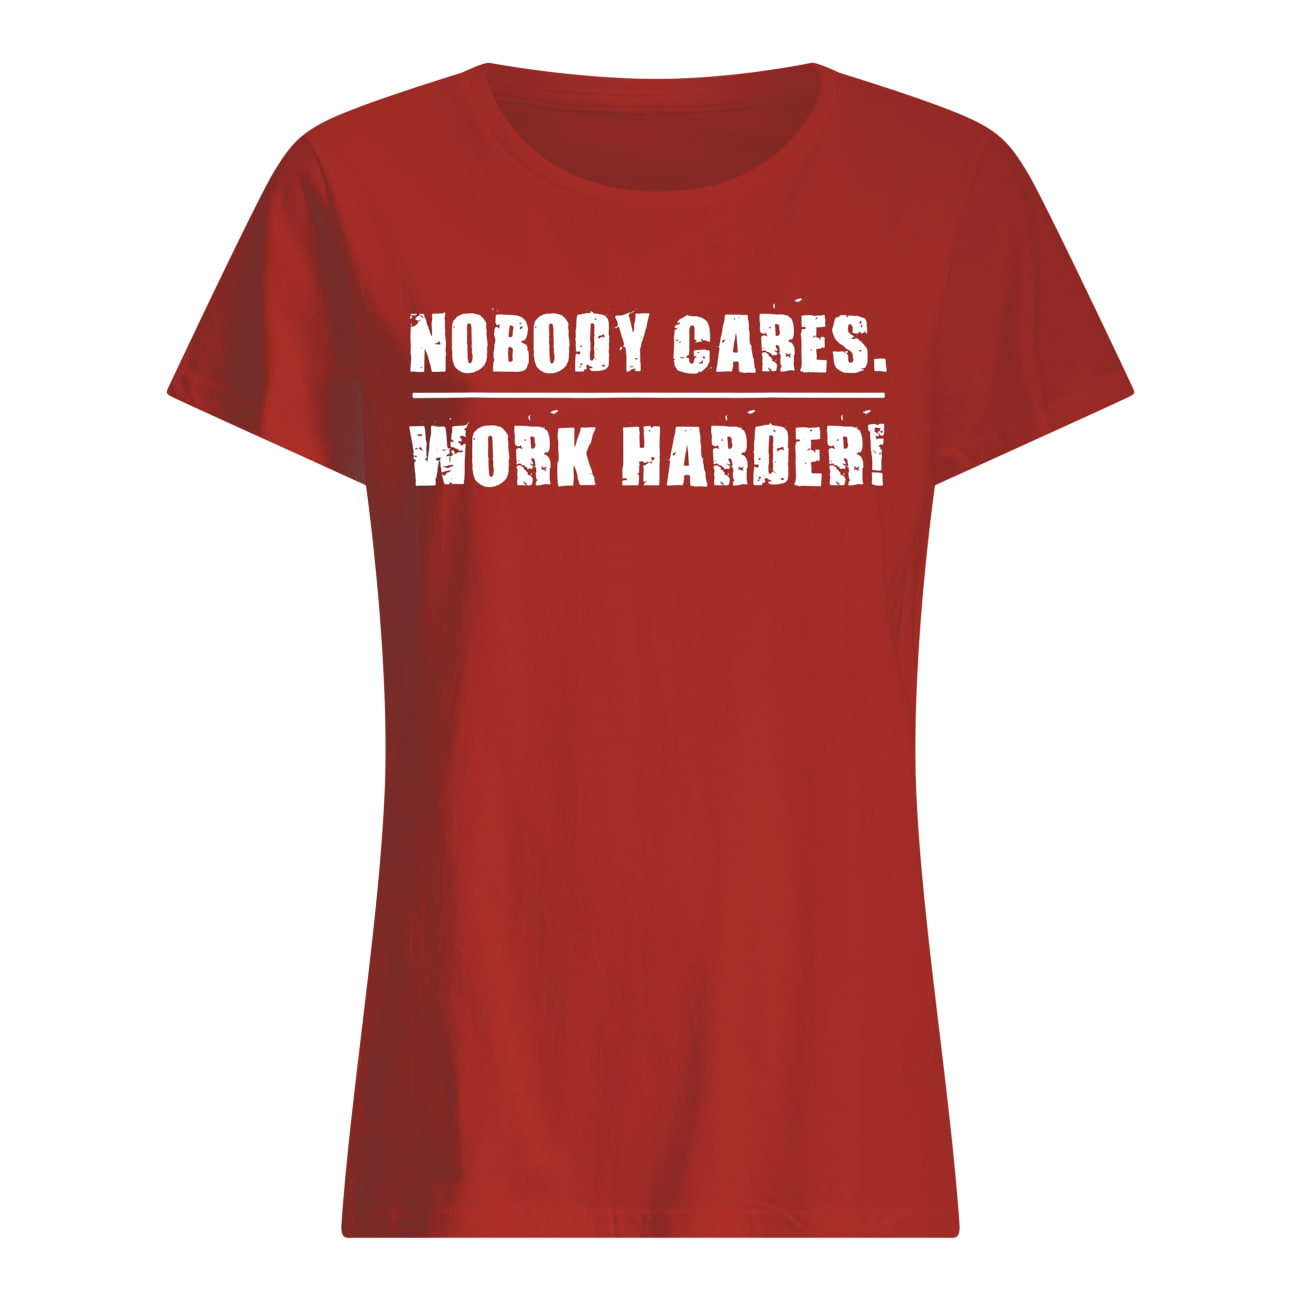 Nobody cares work harder motivational fitness workout gym womens shirt